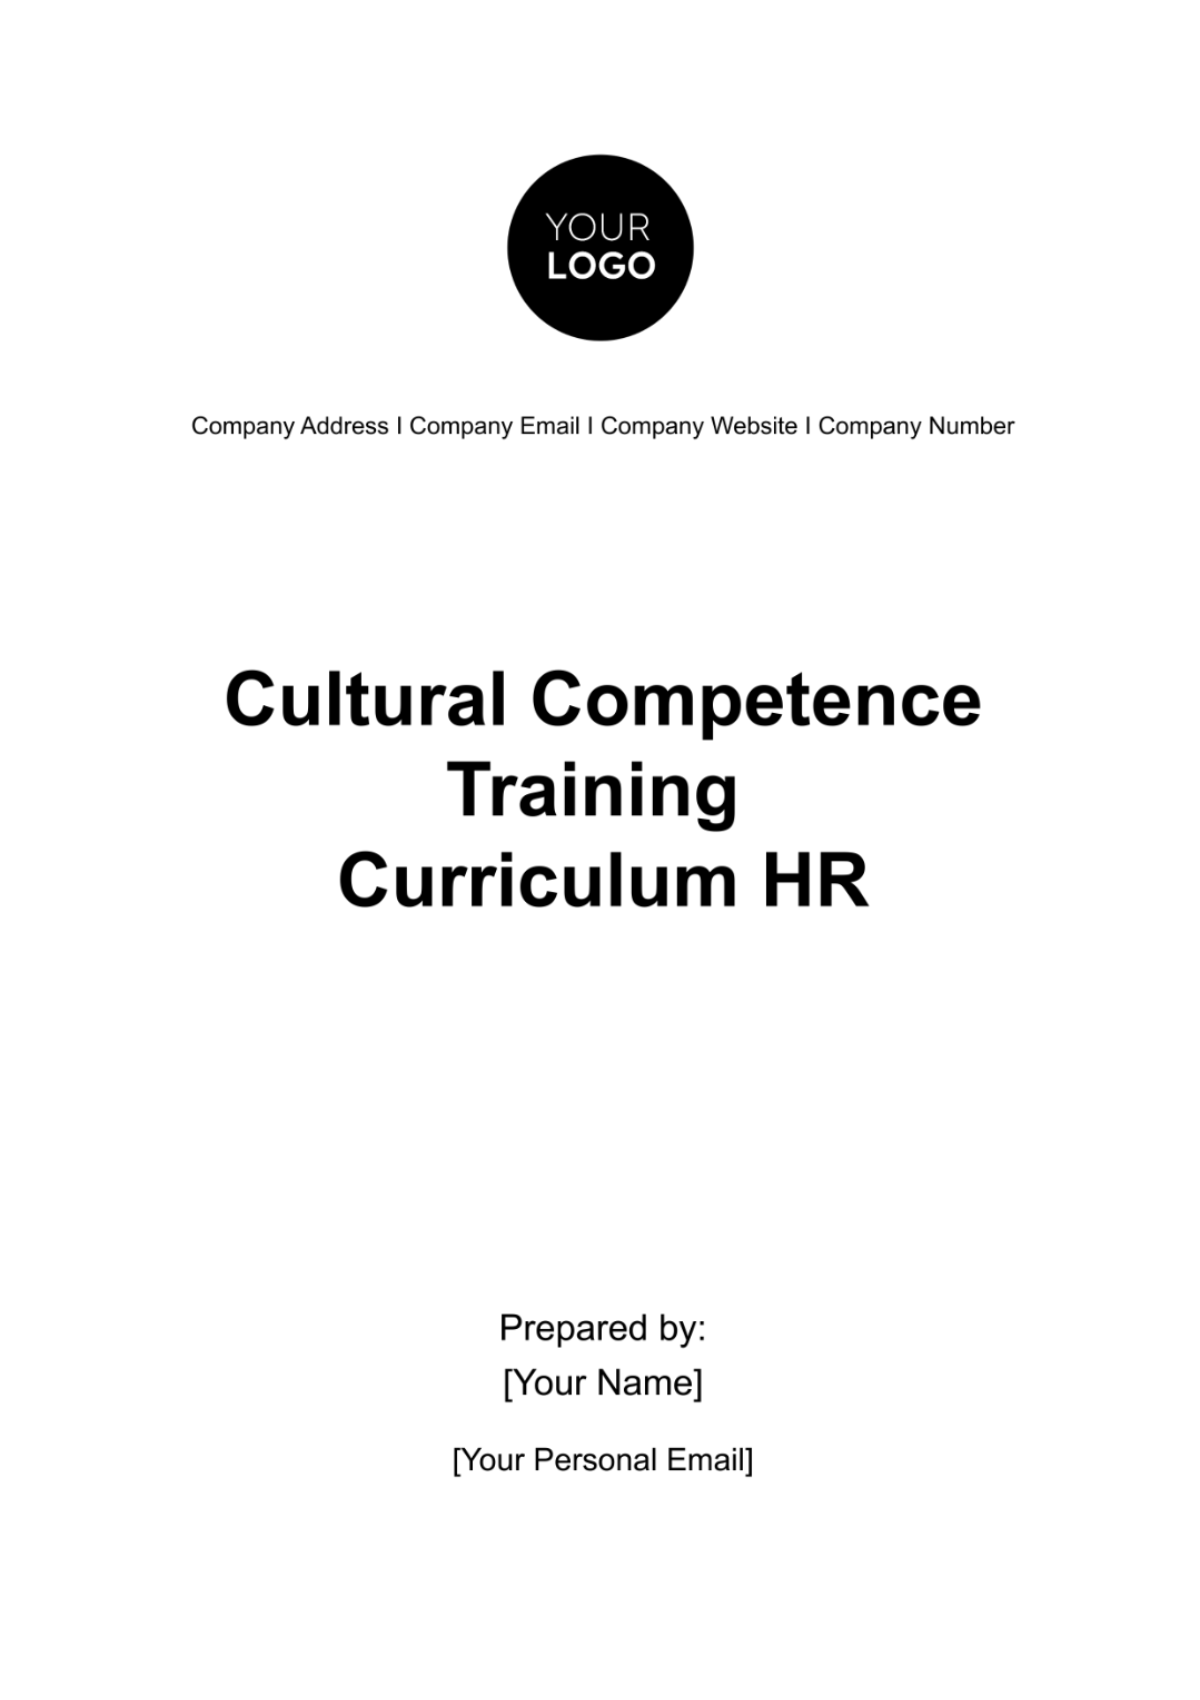 Free Cultural Competence Training Curriculum HR Template